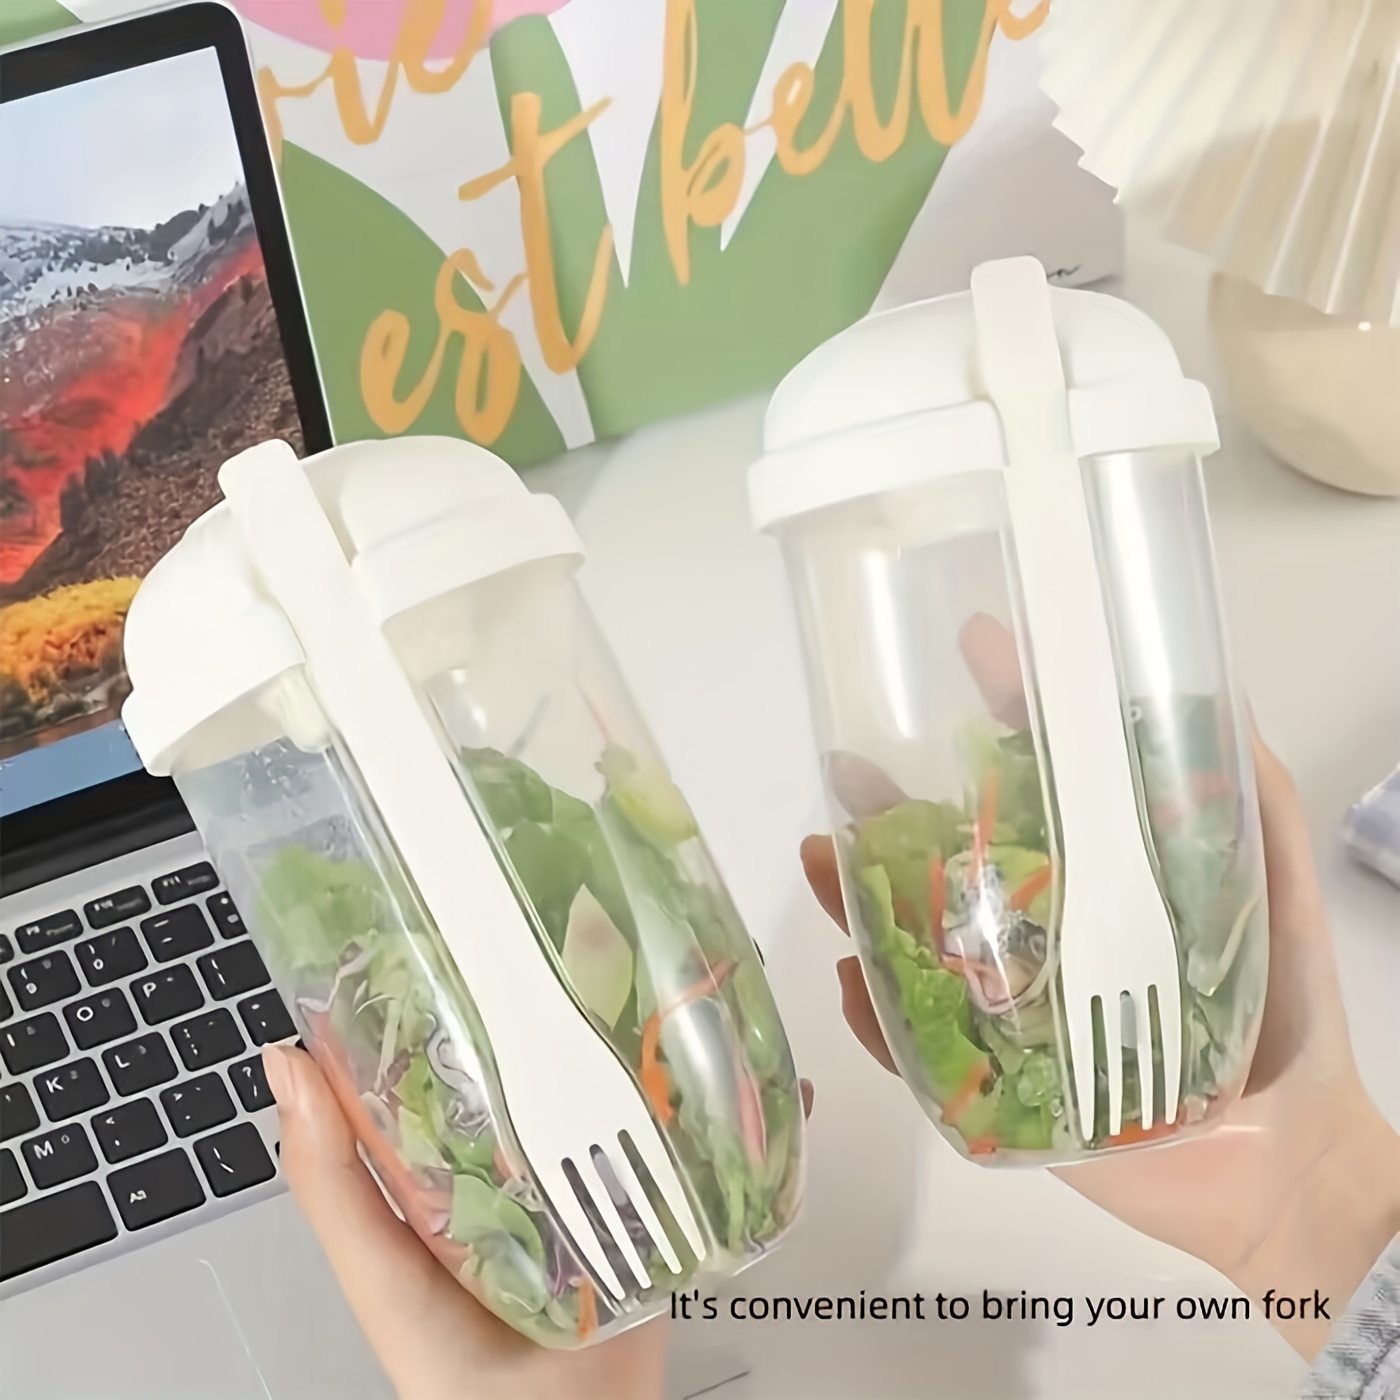 Keep Fit Salad Meal Shaker Cup, Portable Fresh Salad Cup to Go